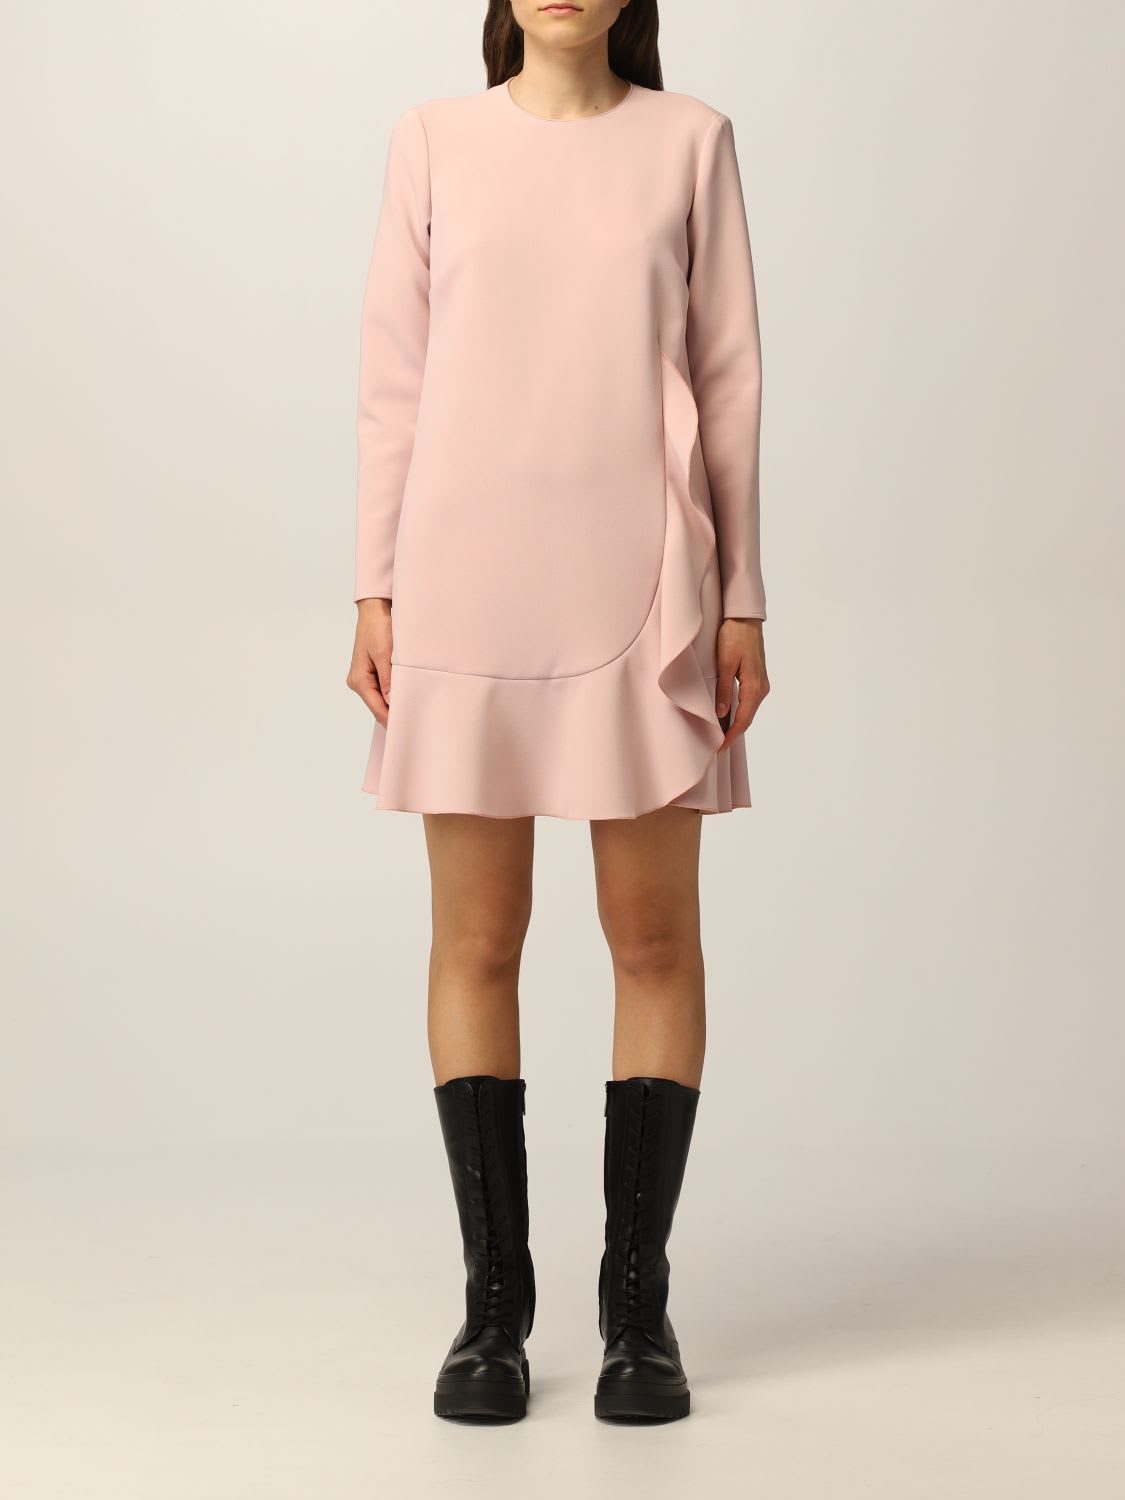 Photo of  Red Valentino Dress Red Valentino Mini Dress In Cady Tech- shop RED Valentino Dresses, Mini Dresses online sales